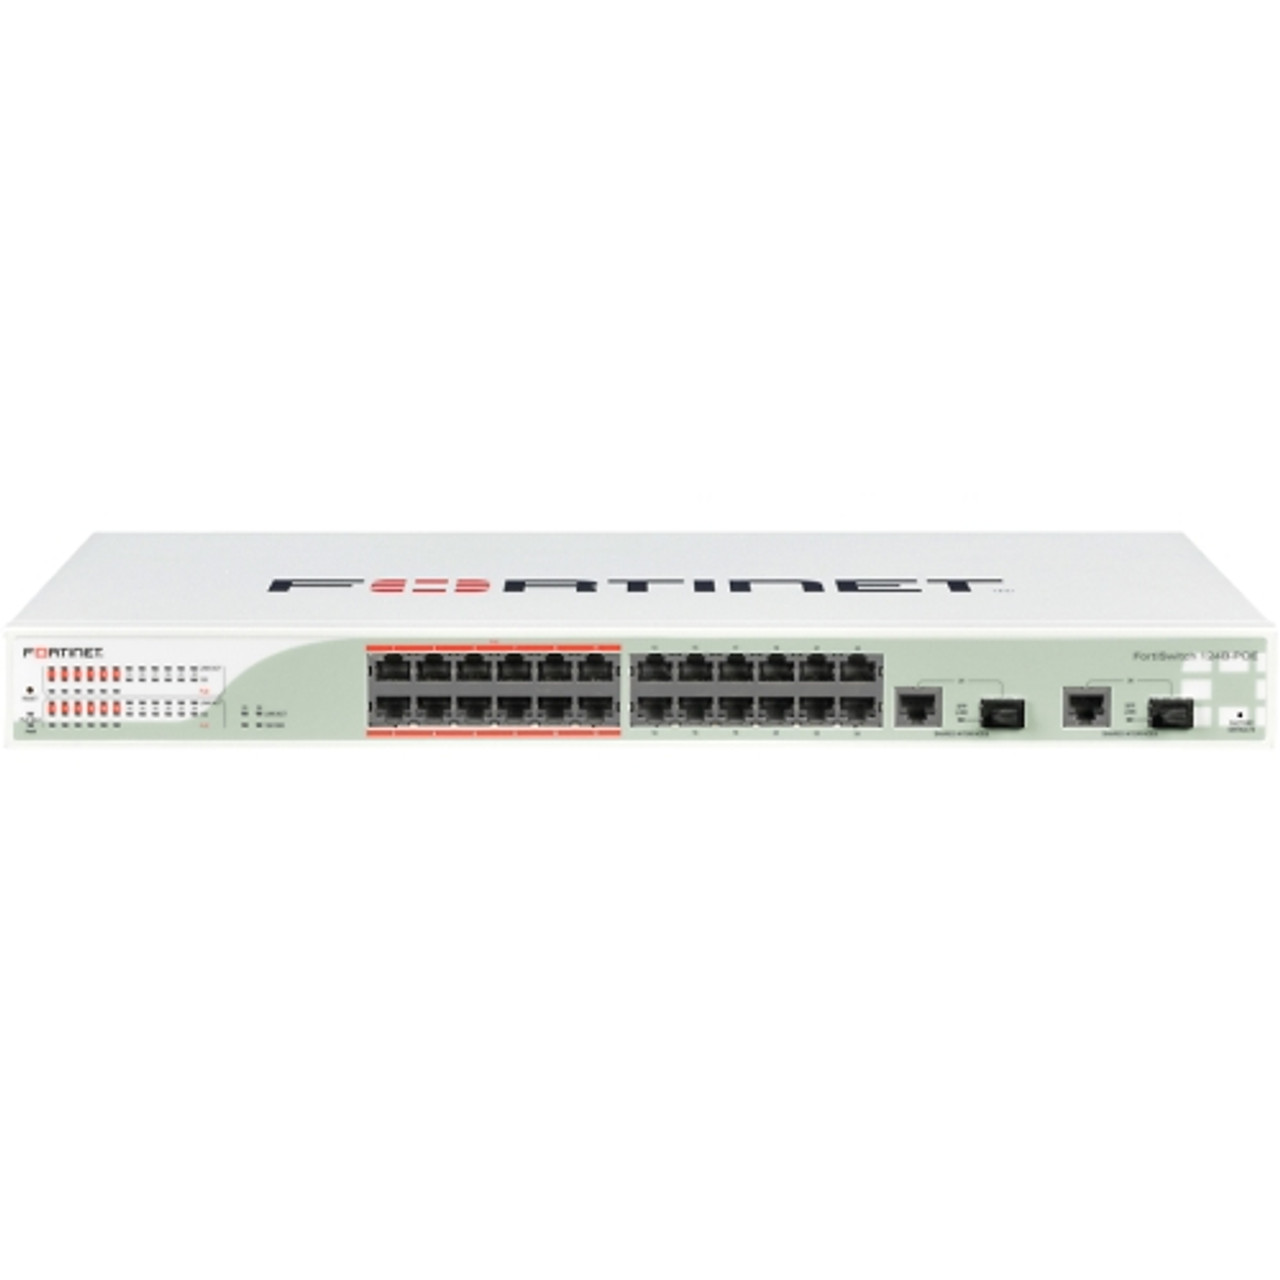 FS-124B-POE Fortinet FortiSwitch-124B-POE Manageable 2 Layer Supported 1U High Rack-mountable (Refurbished)